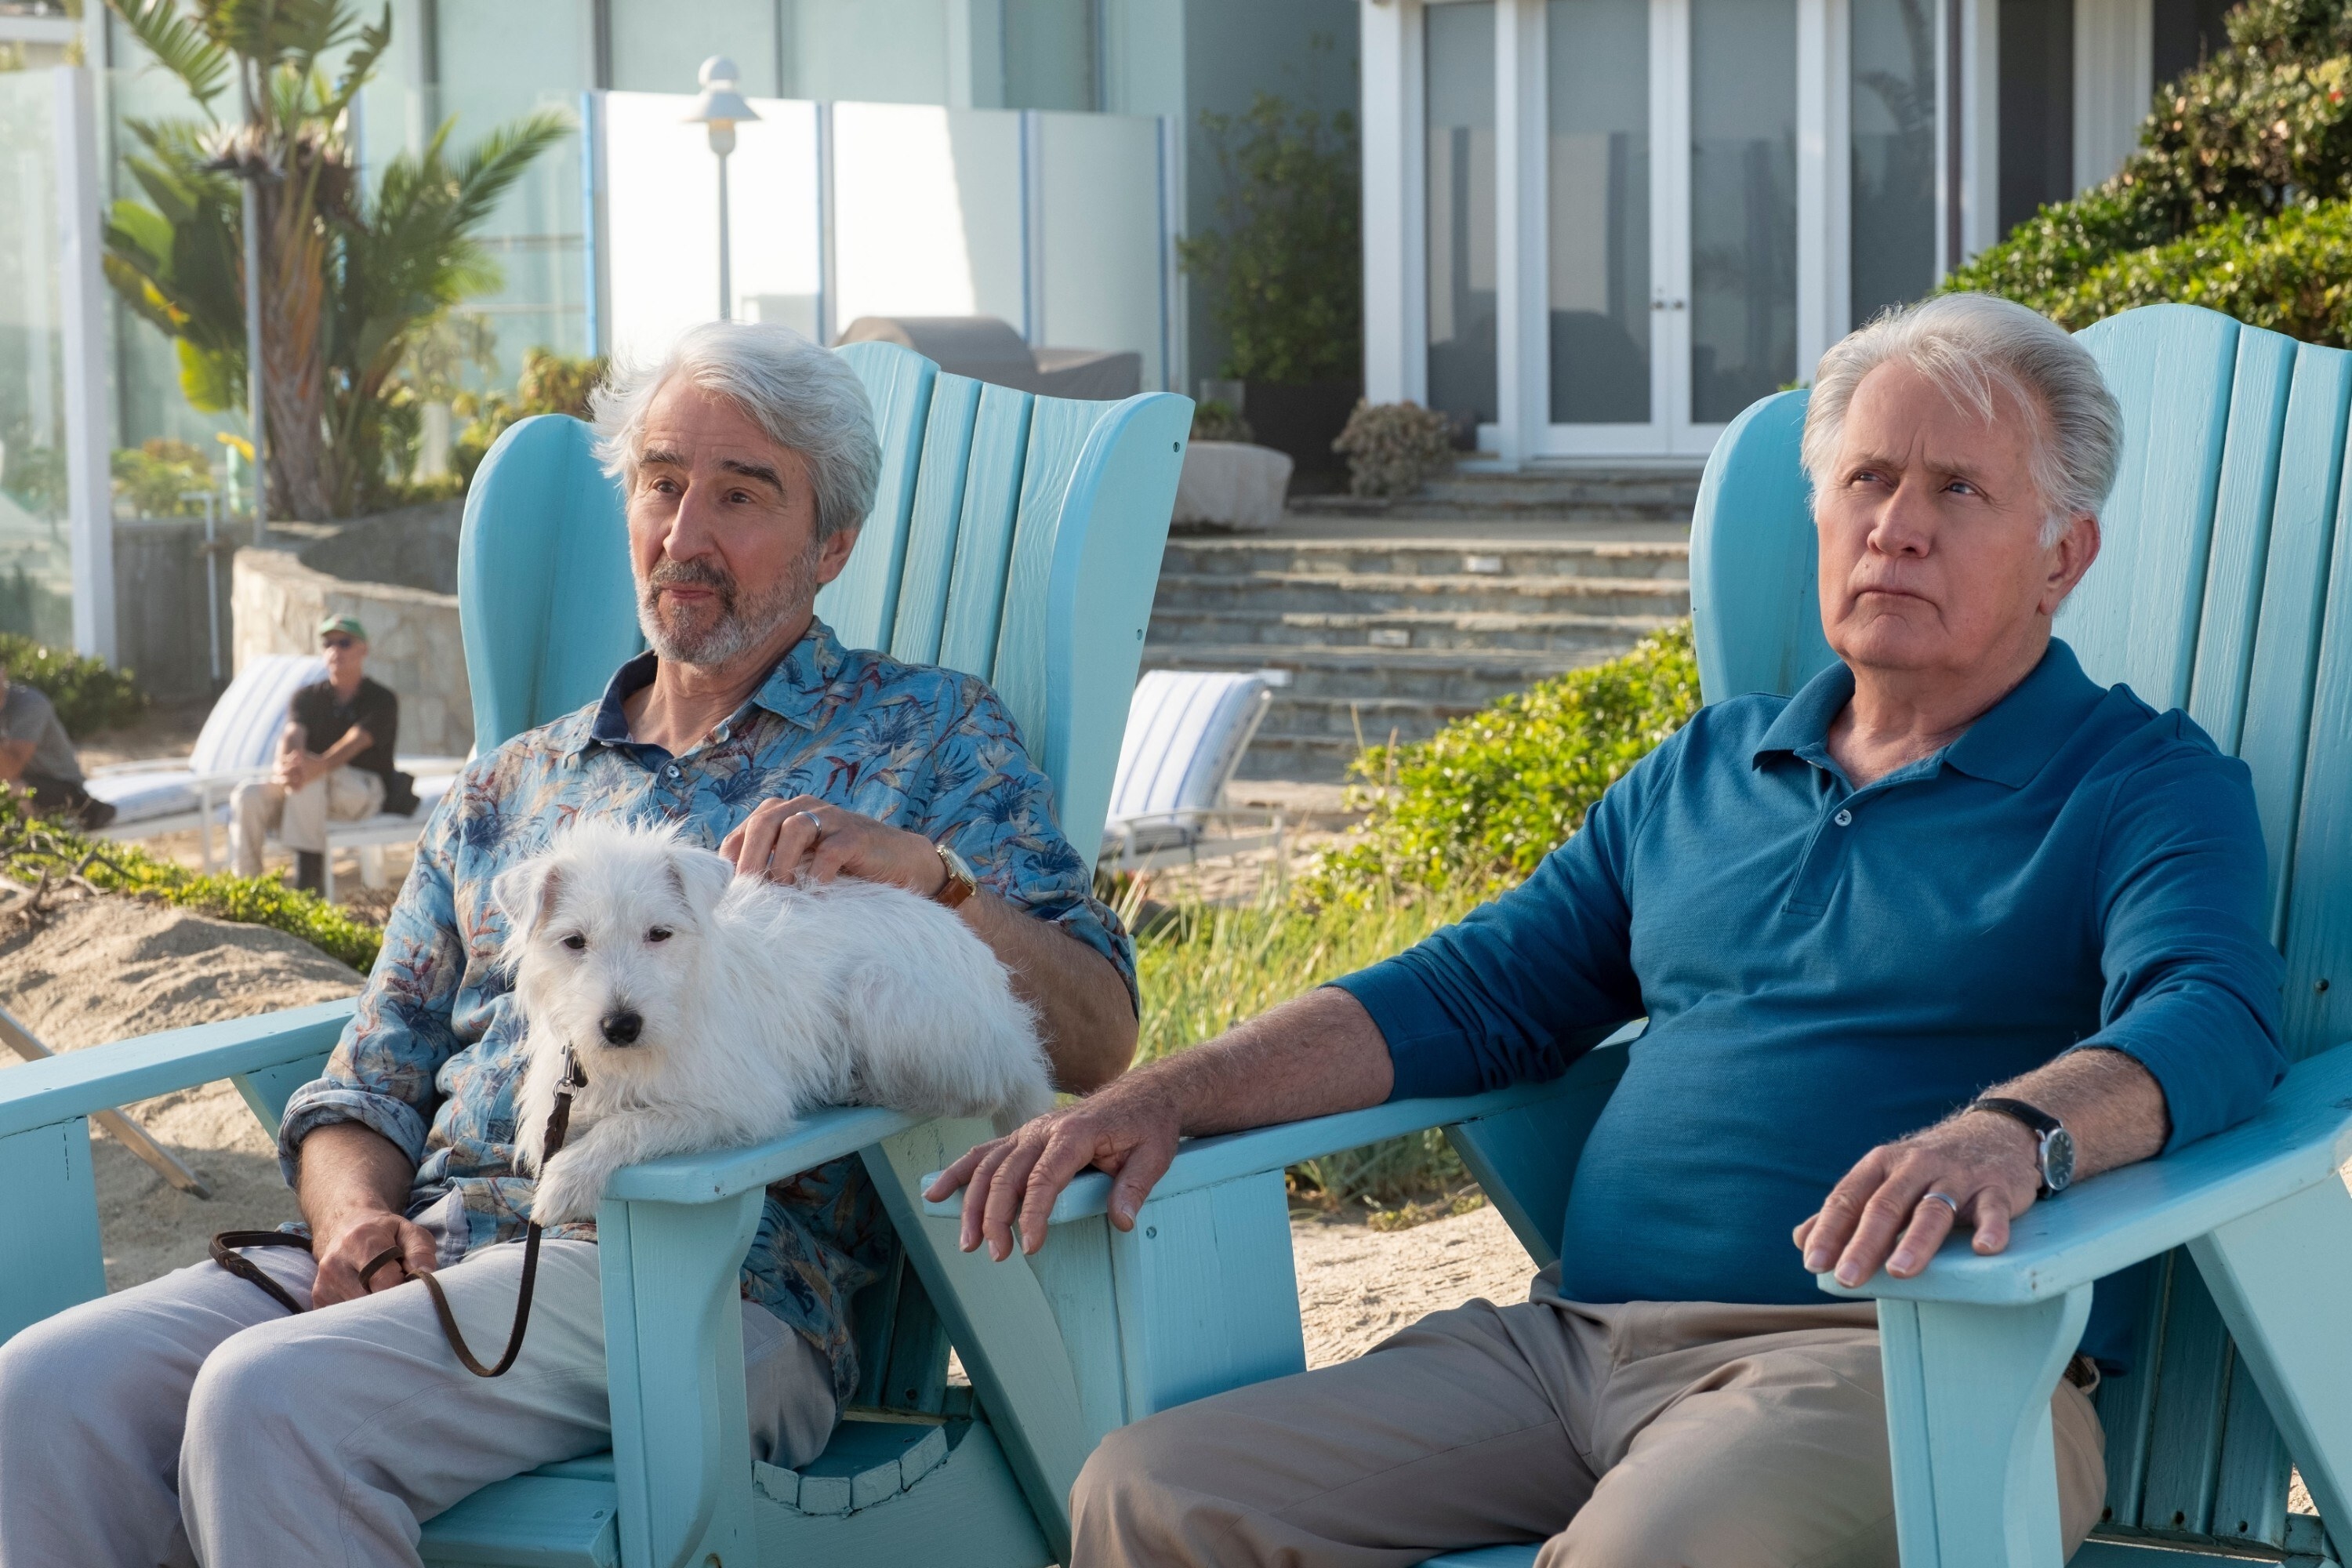 Sam Waterston and Martin Sheen in Adirondack chairs with their dog